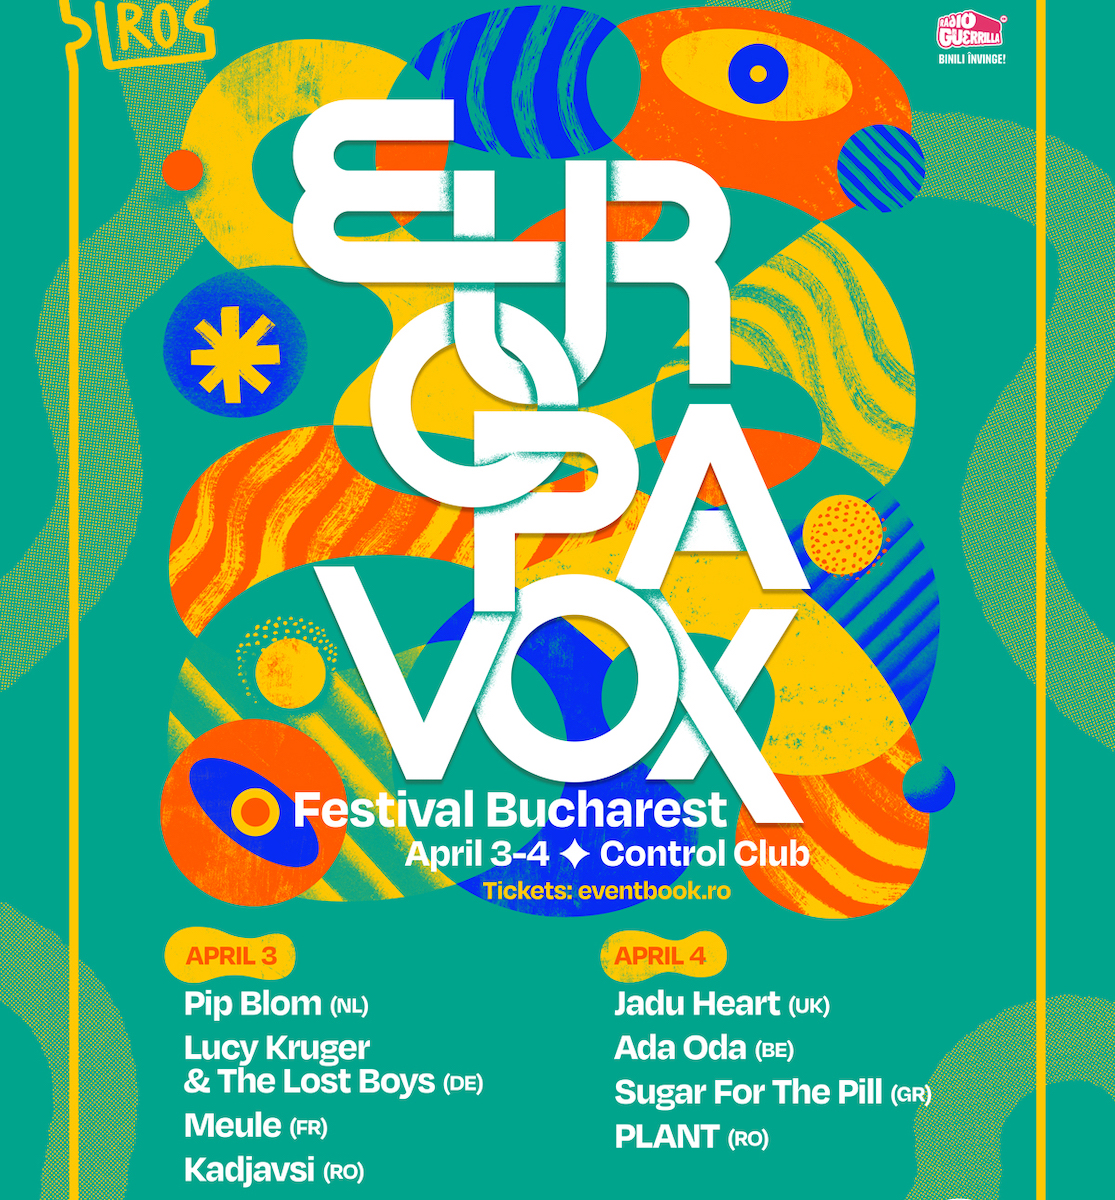 Artists from six European countries come to Europavox Festival Bucharest in April